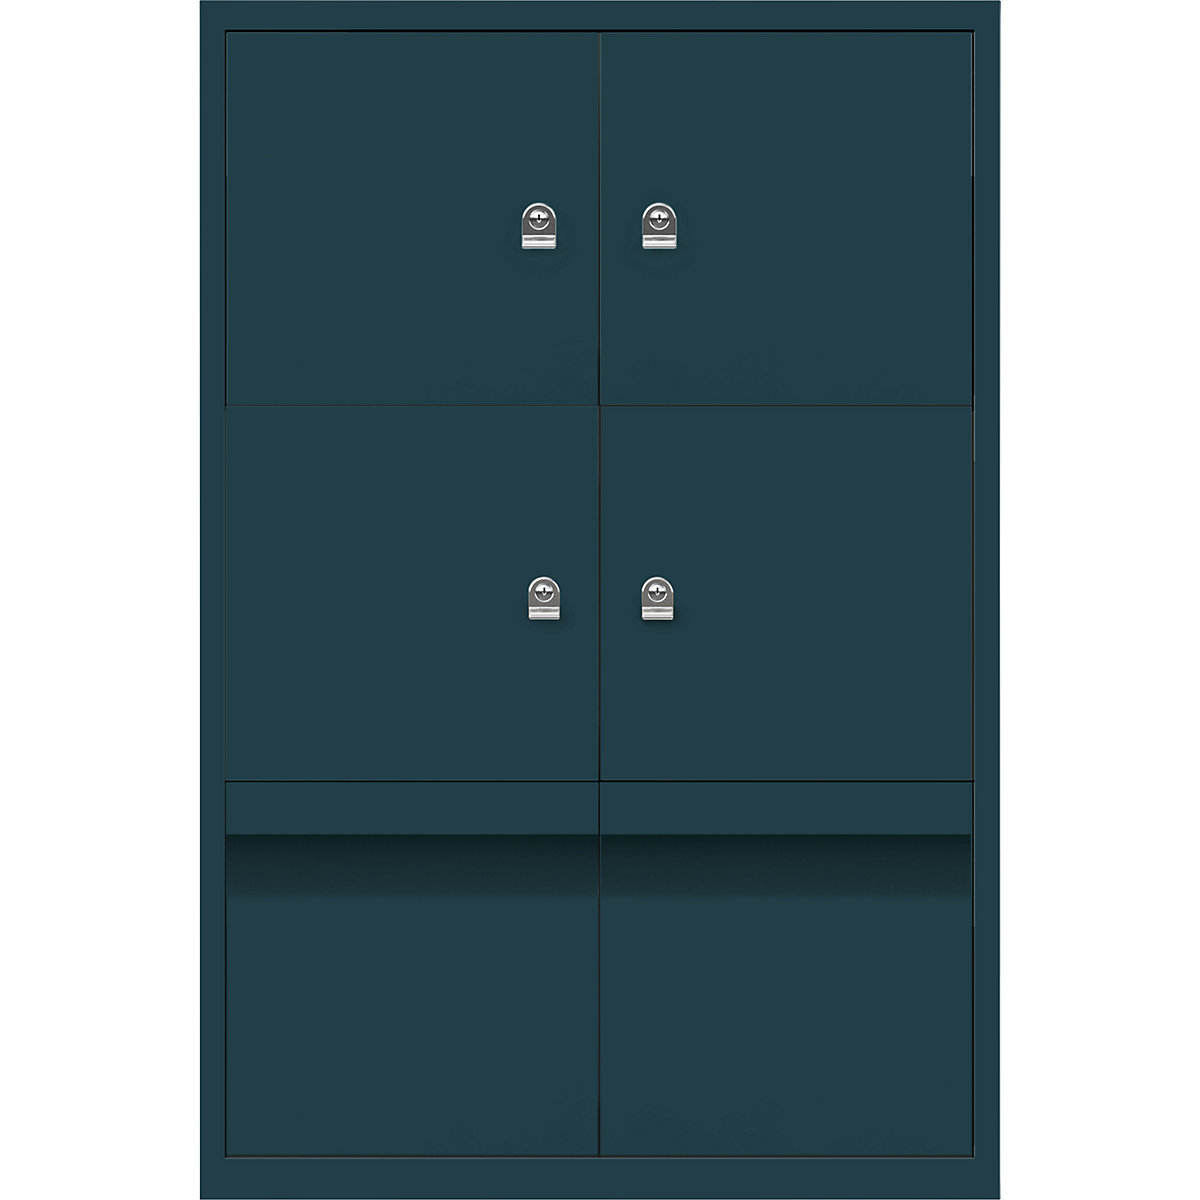 LateralFile™ lodge – BISLEY, with 4 lockable compartments and 2 drawers, height 375 mm each, ocean-11